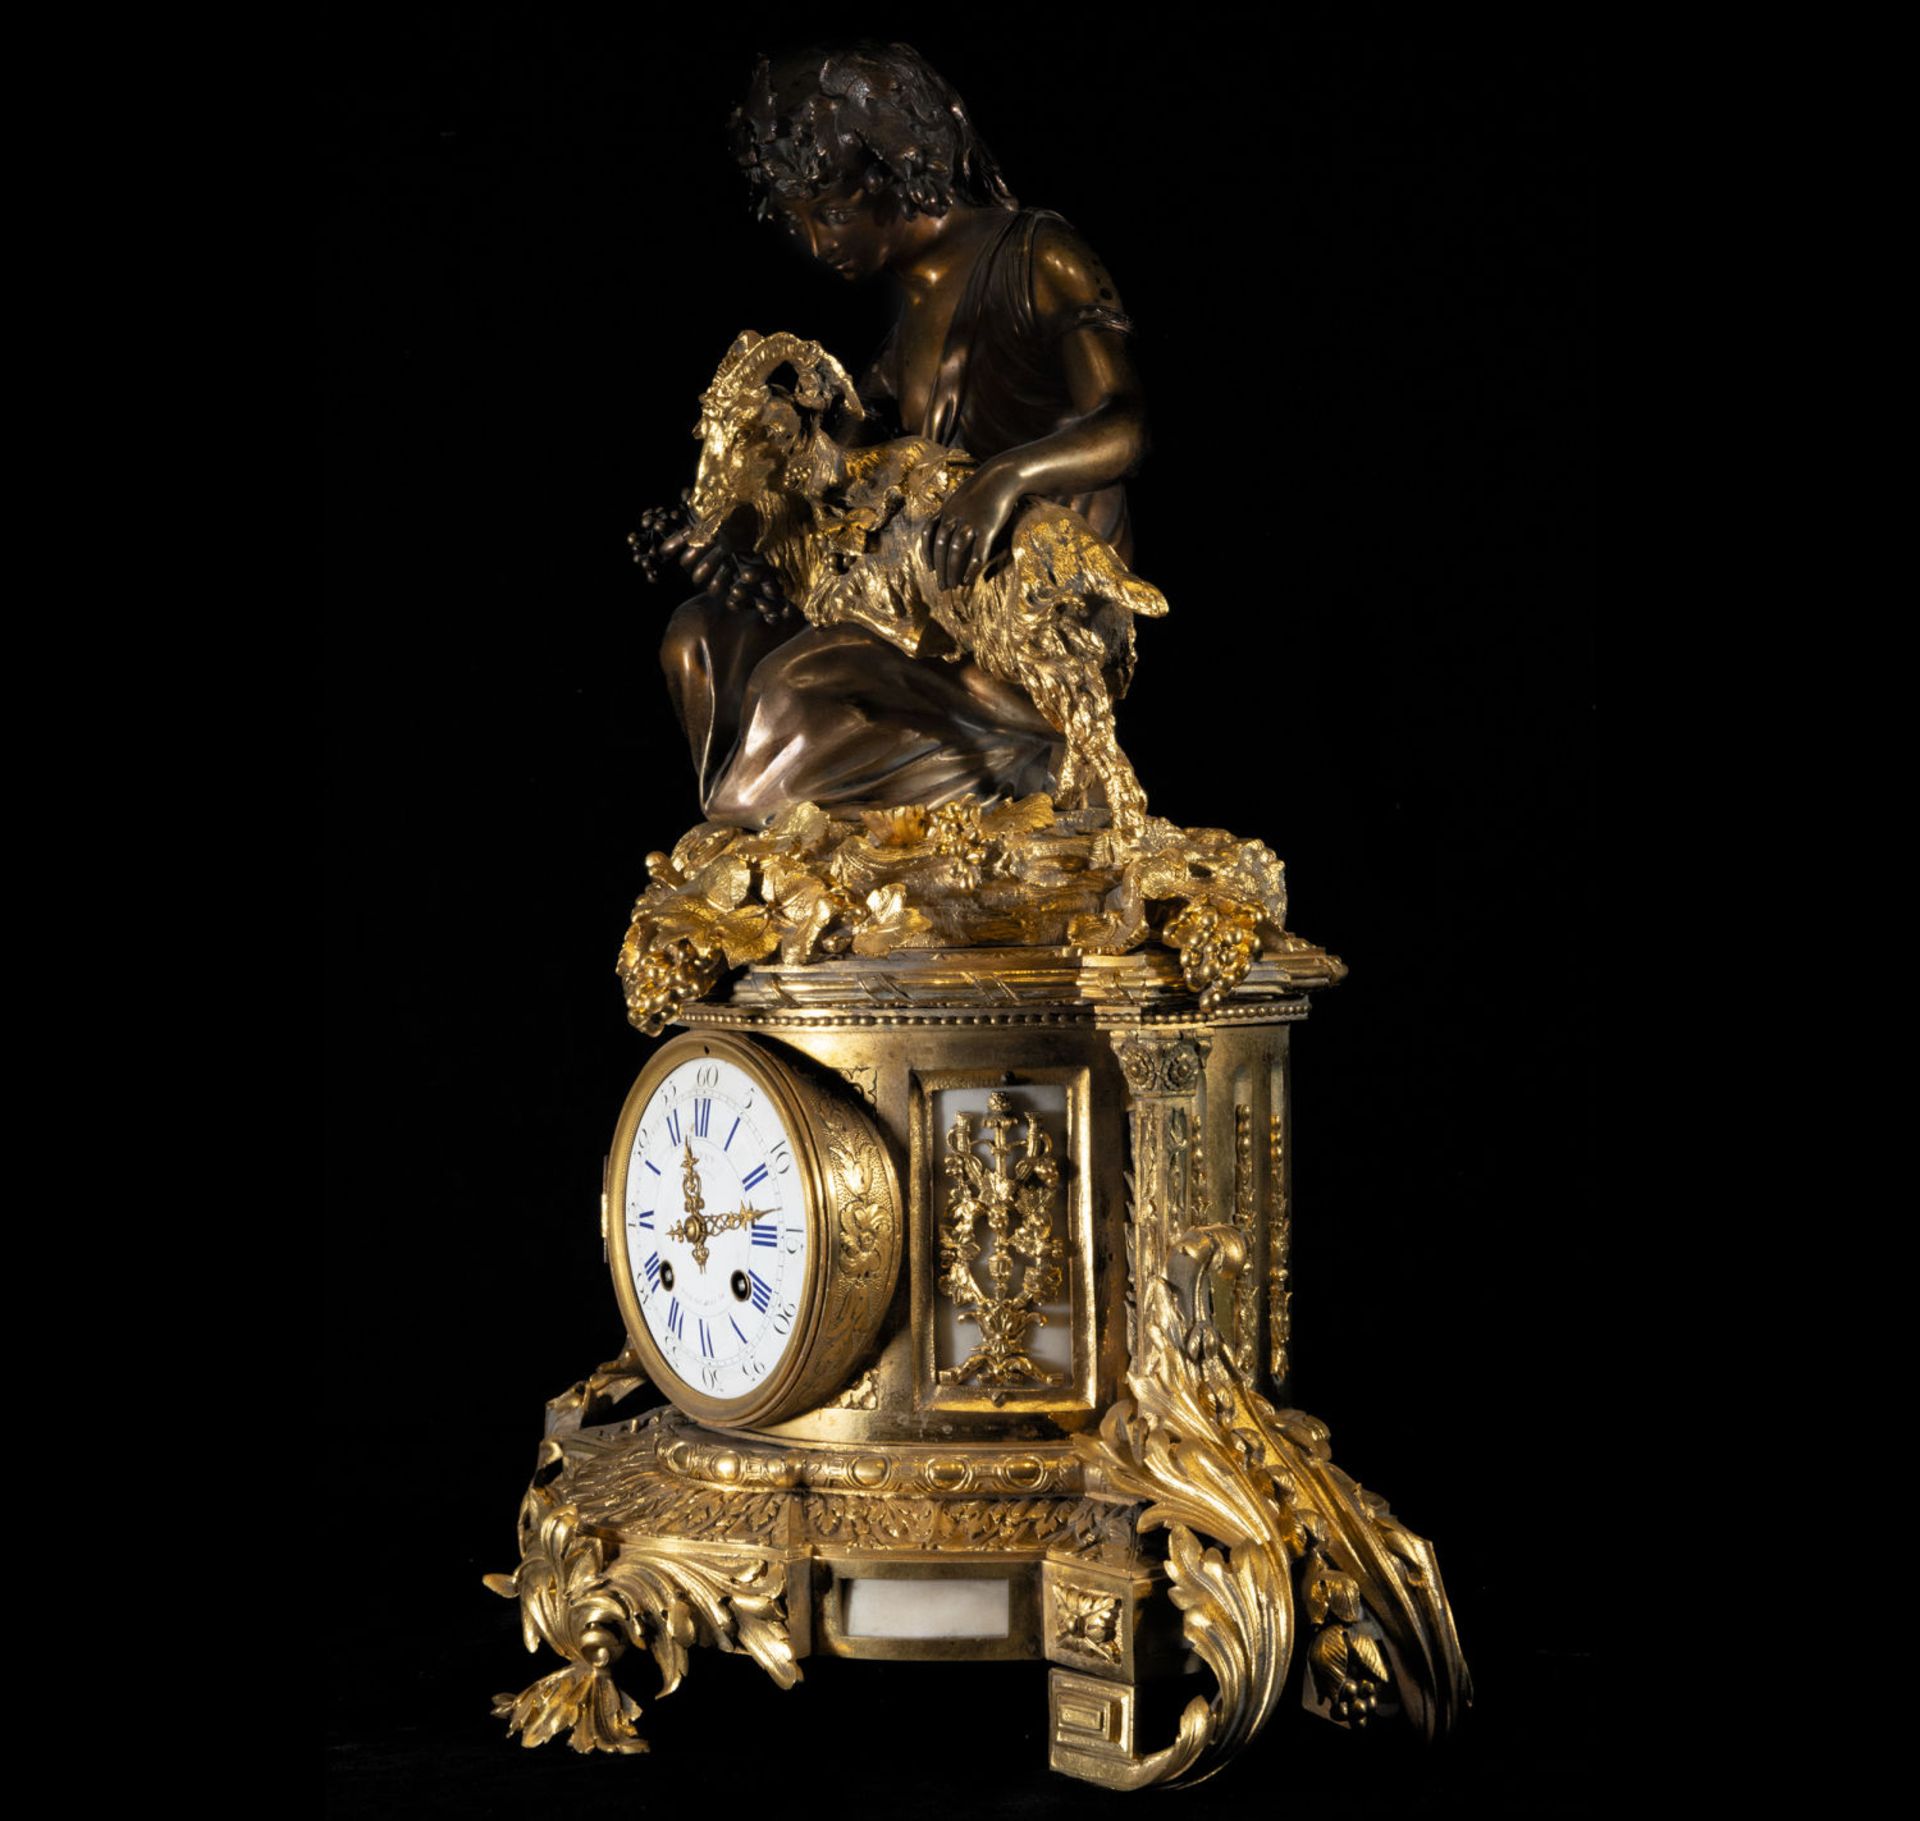 Exquisite Large French Table Clock in Mercury-Gilded Bronze and Alabaster with Bacchus and Goat, Nap - Image 5 of 9